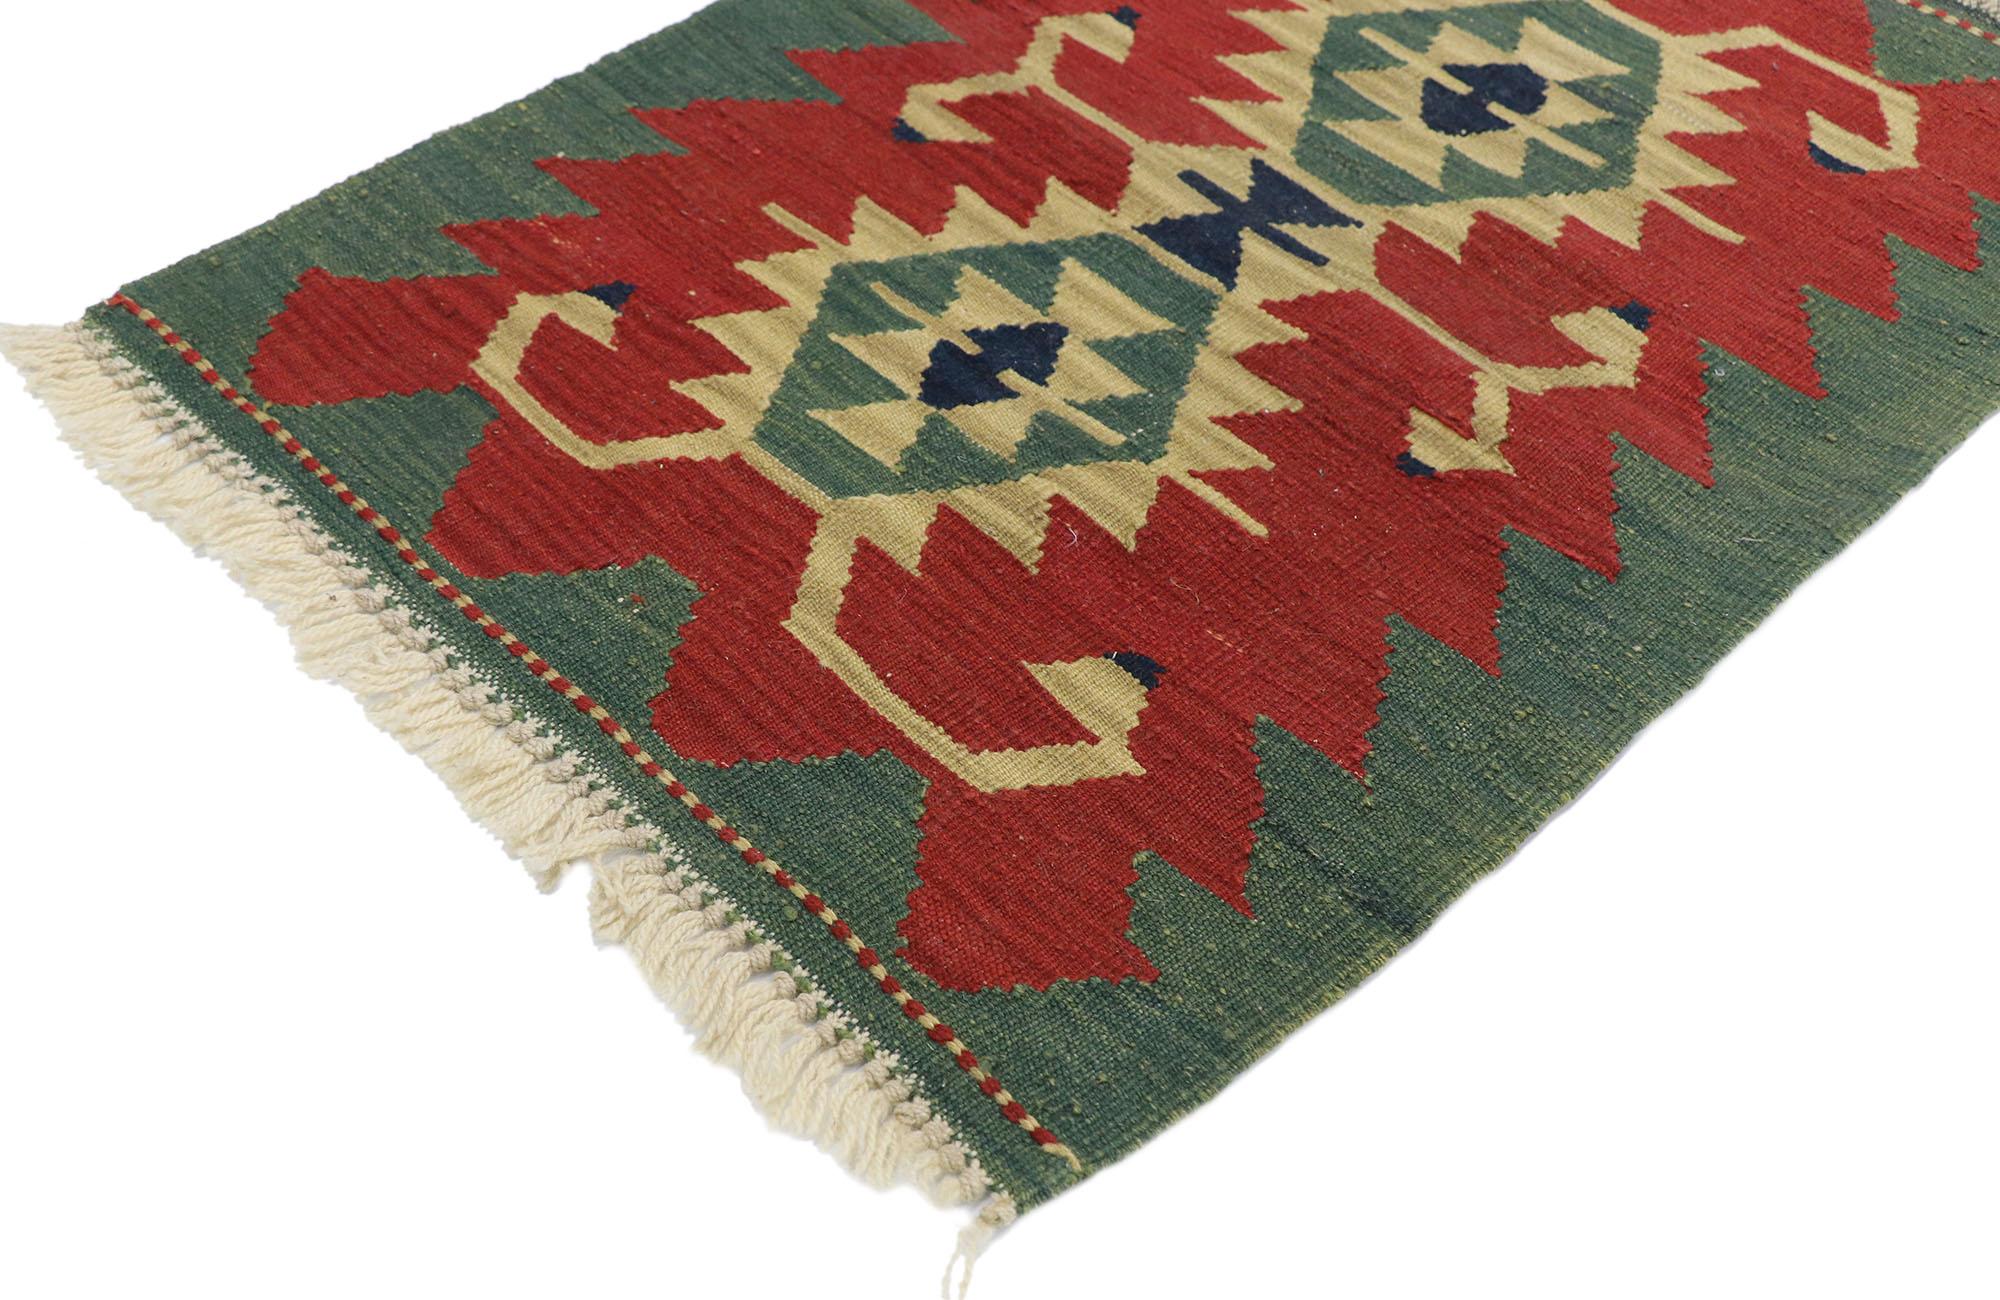 77860, Vintage Persian Shiraz Kilim rug with Tribal Style 02'00 x 02'09. Full of tiny details and a bold expressive design combined with vibrant colors and tribal style, this hand-woven wool vintage Persian Shiraz kilim rug is a captivating vision